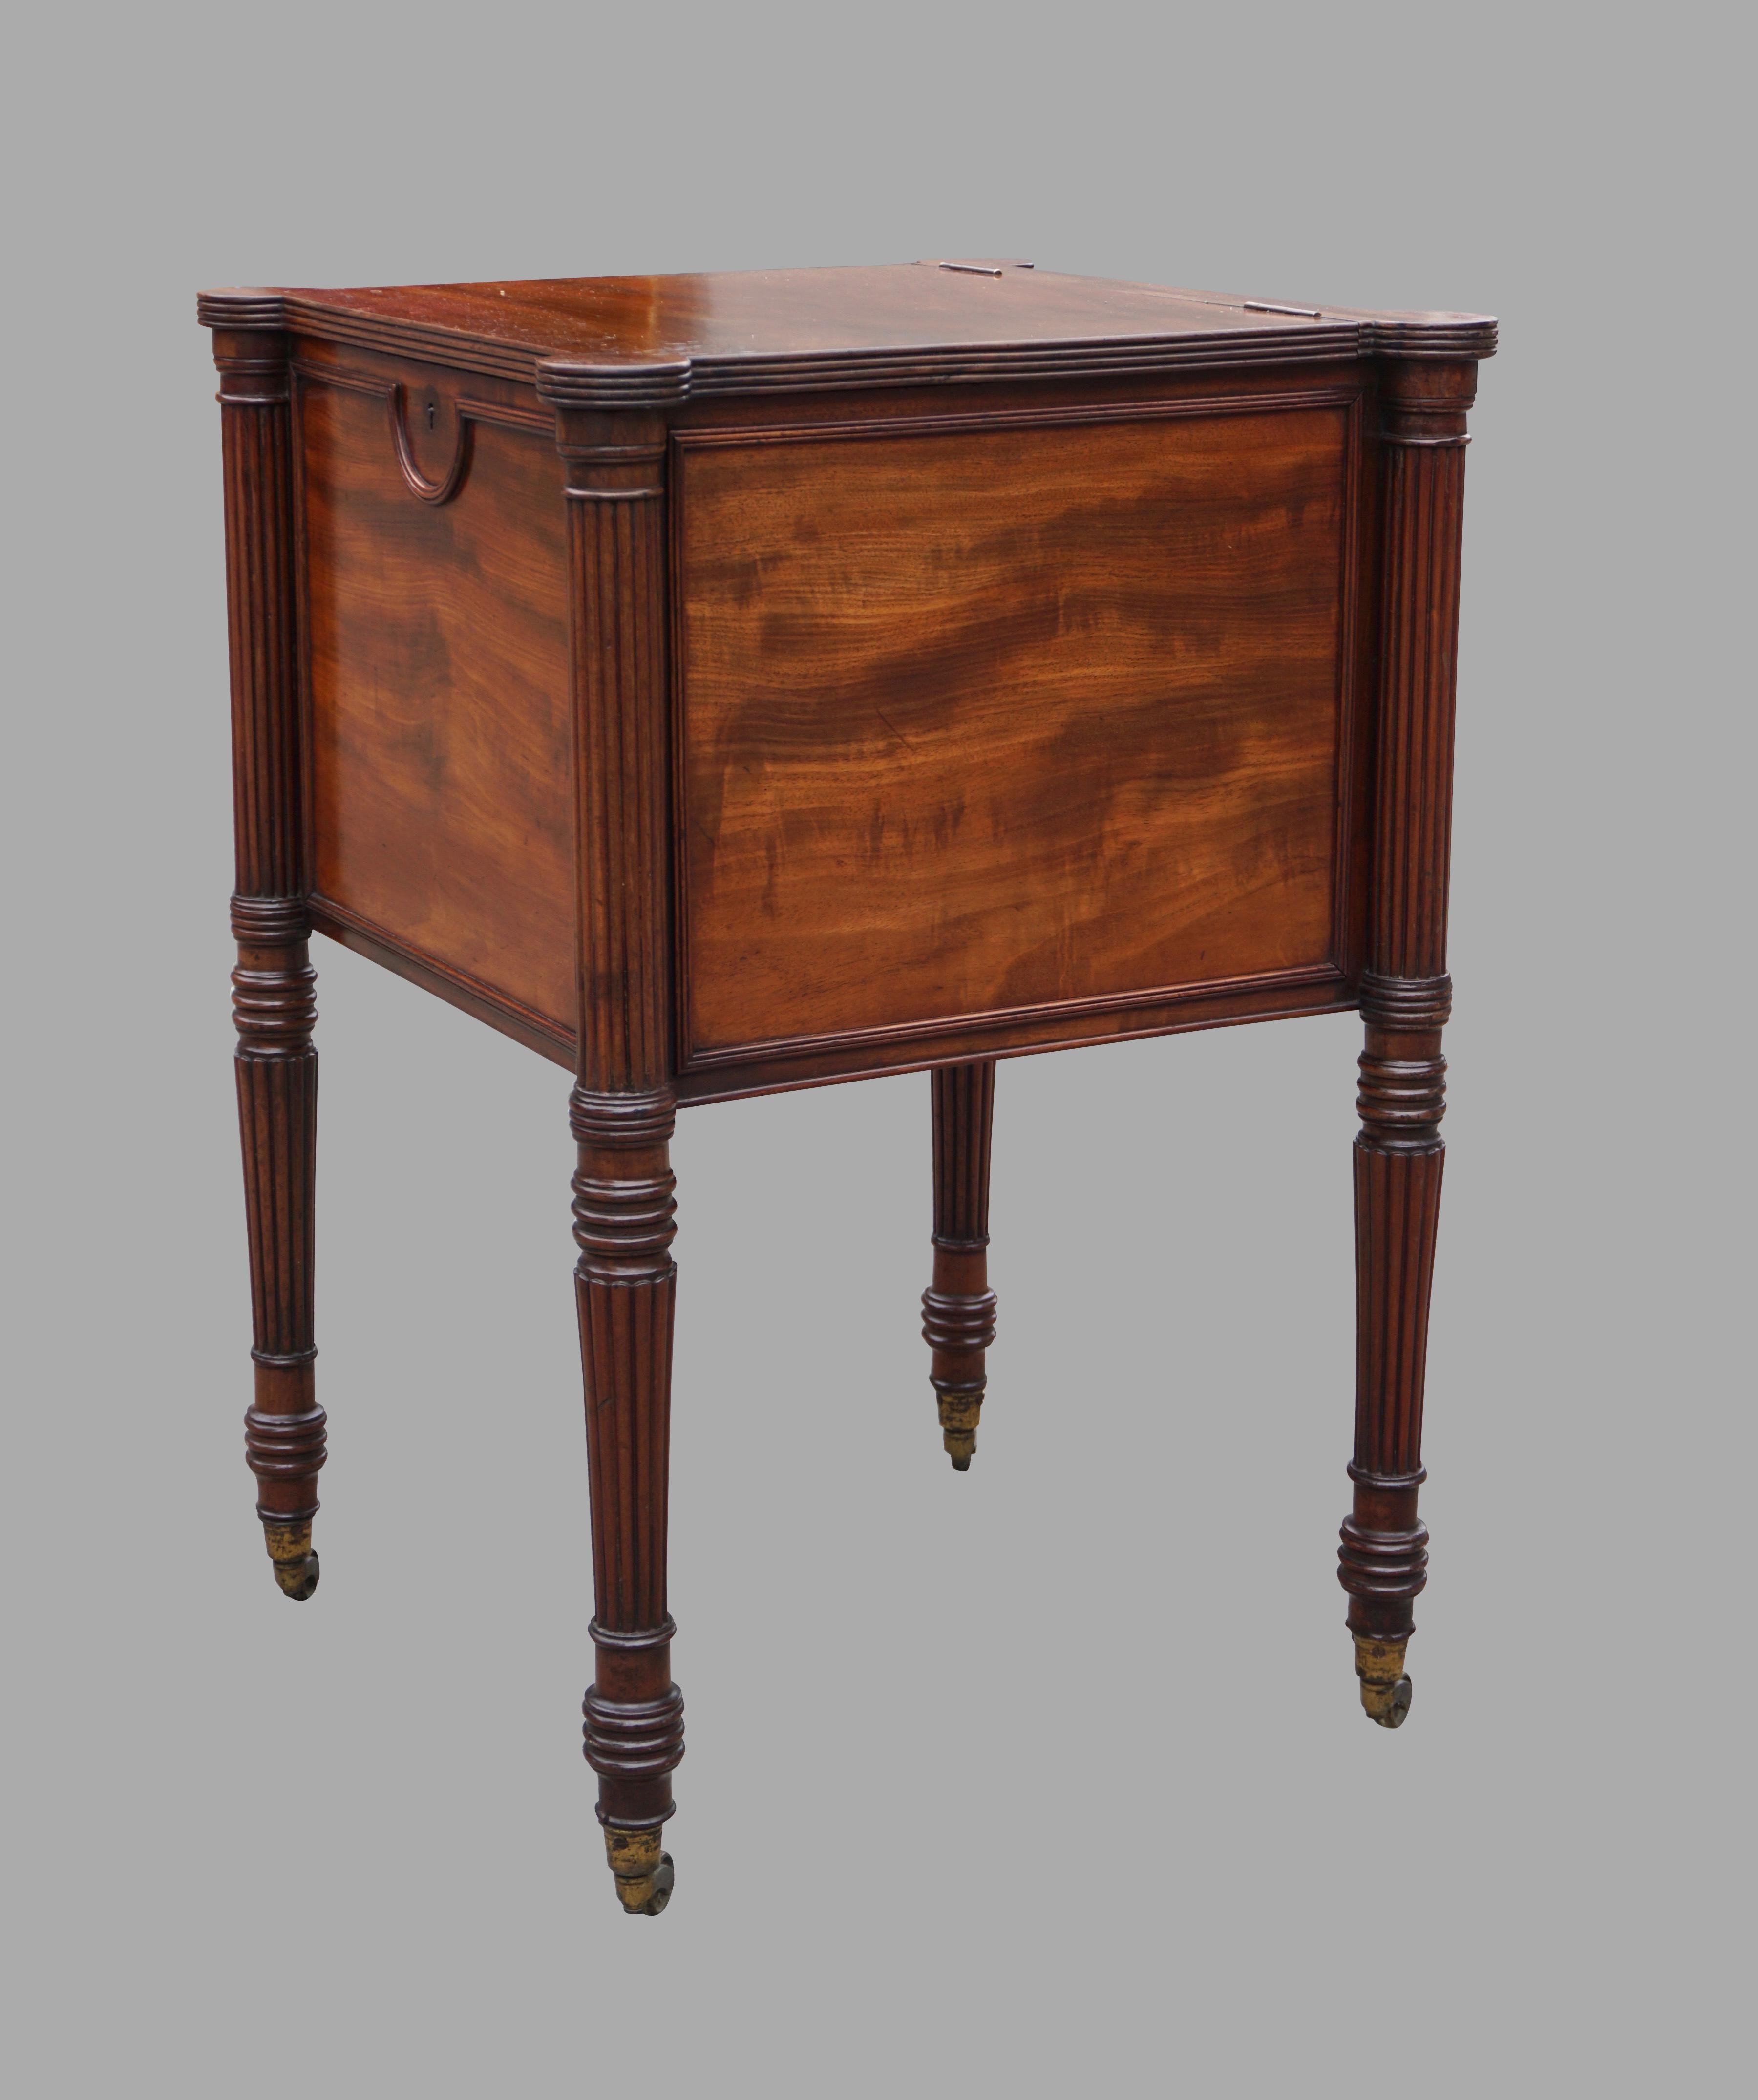 European English Regency Period Mahogany Cellarette in the Manner of Gillows